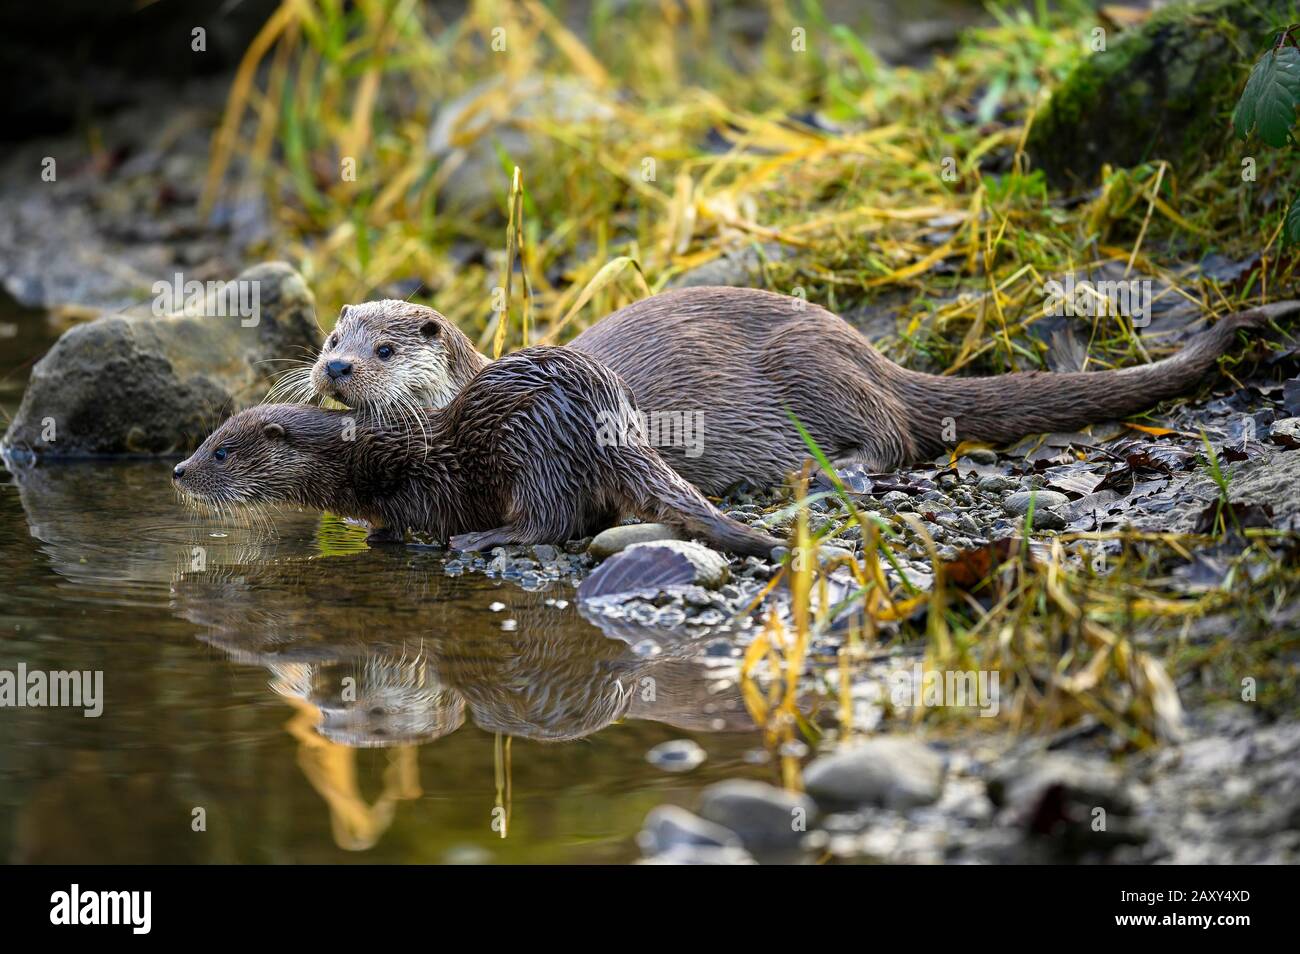 European otter (Lutra lutra), female with young sitting on the bank of a pond, captive, Switzerland Stock Photo